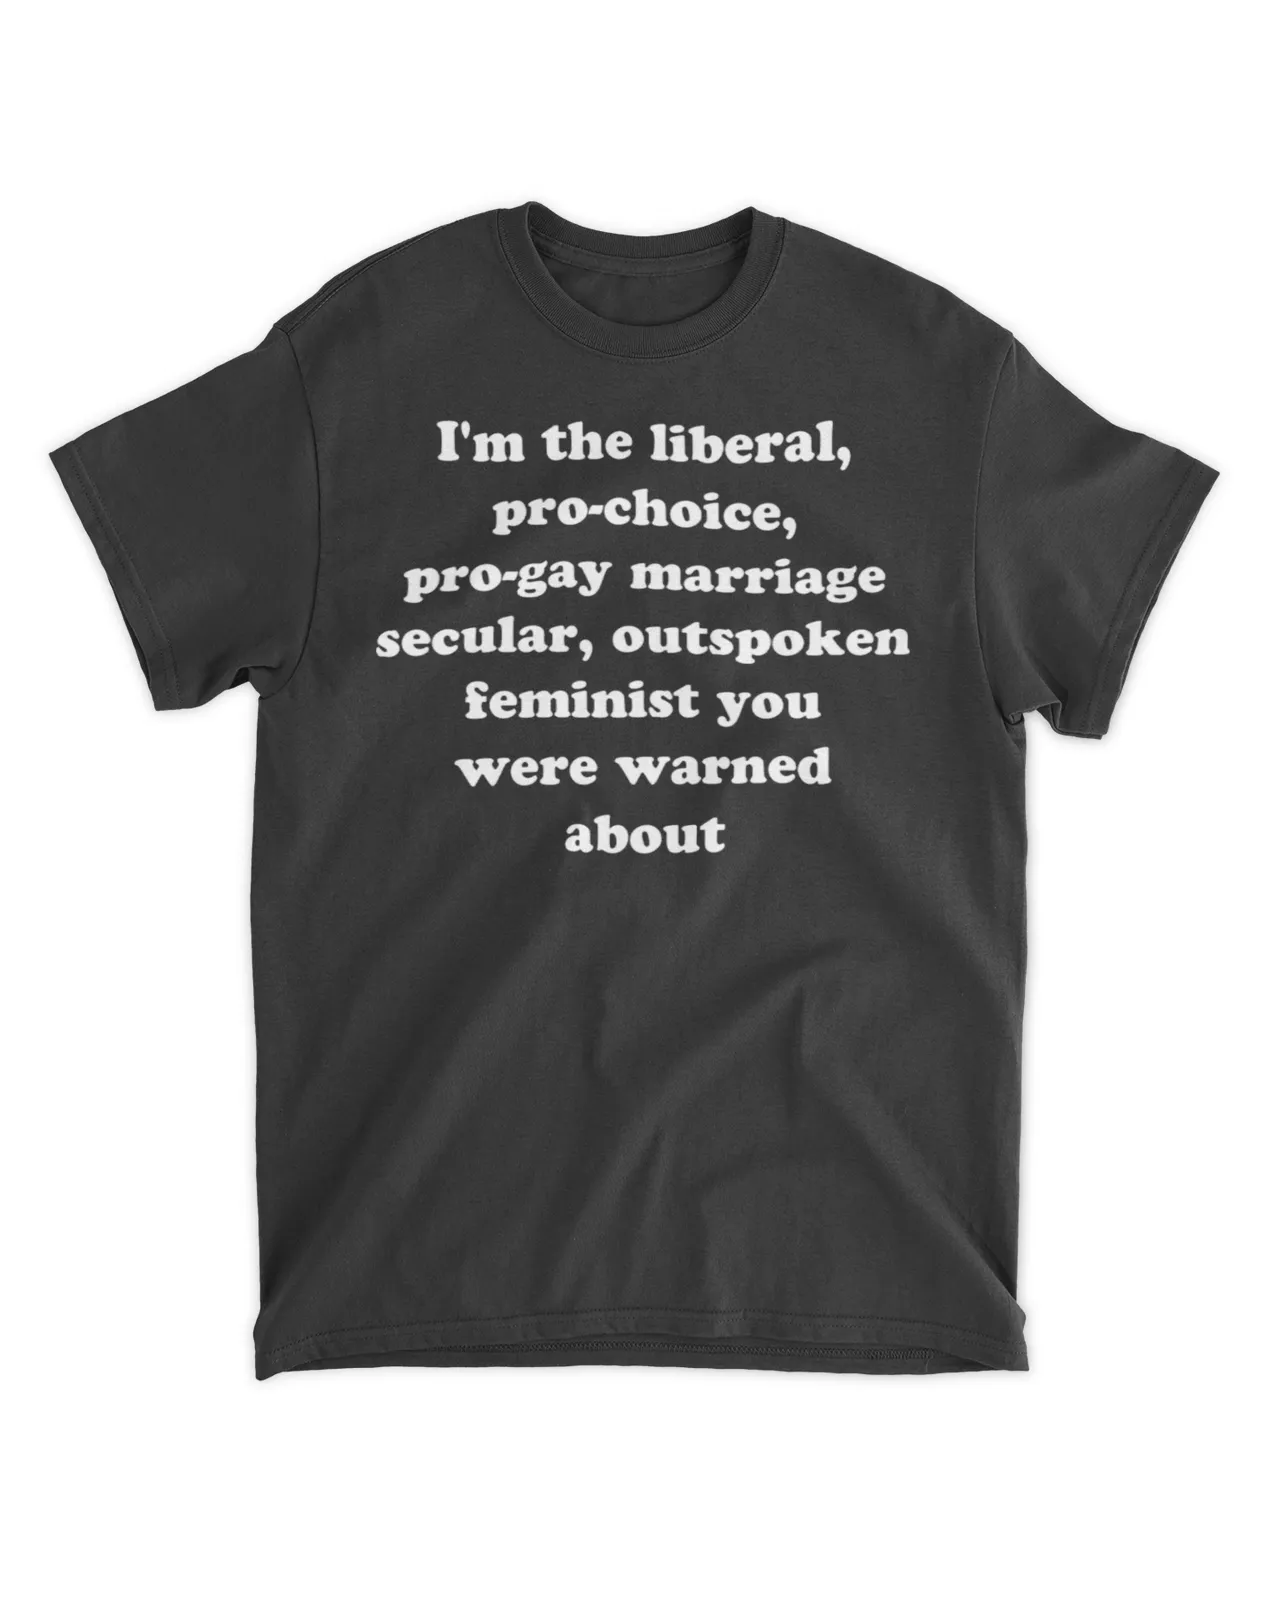  I'm the liberal pro choice pro gay marriage secular outspoken feminist you were warned about shirt